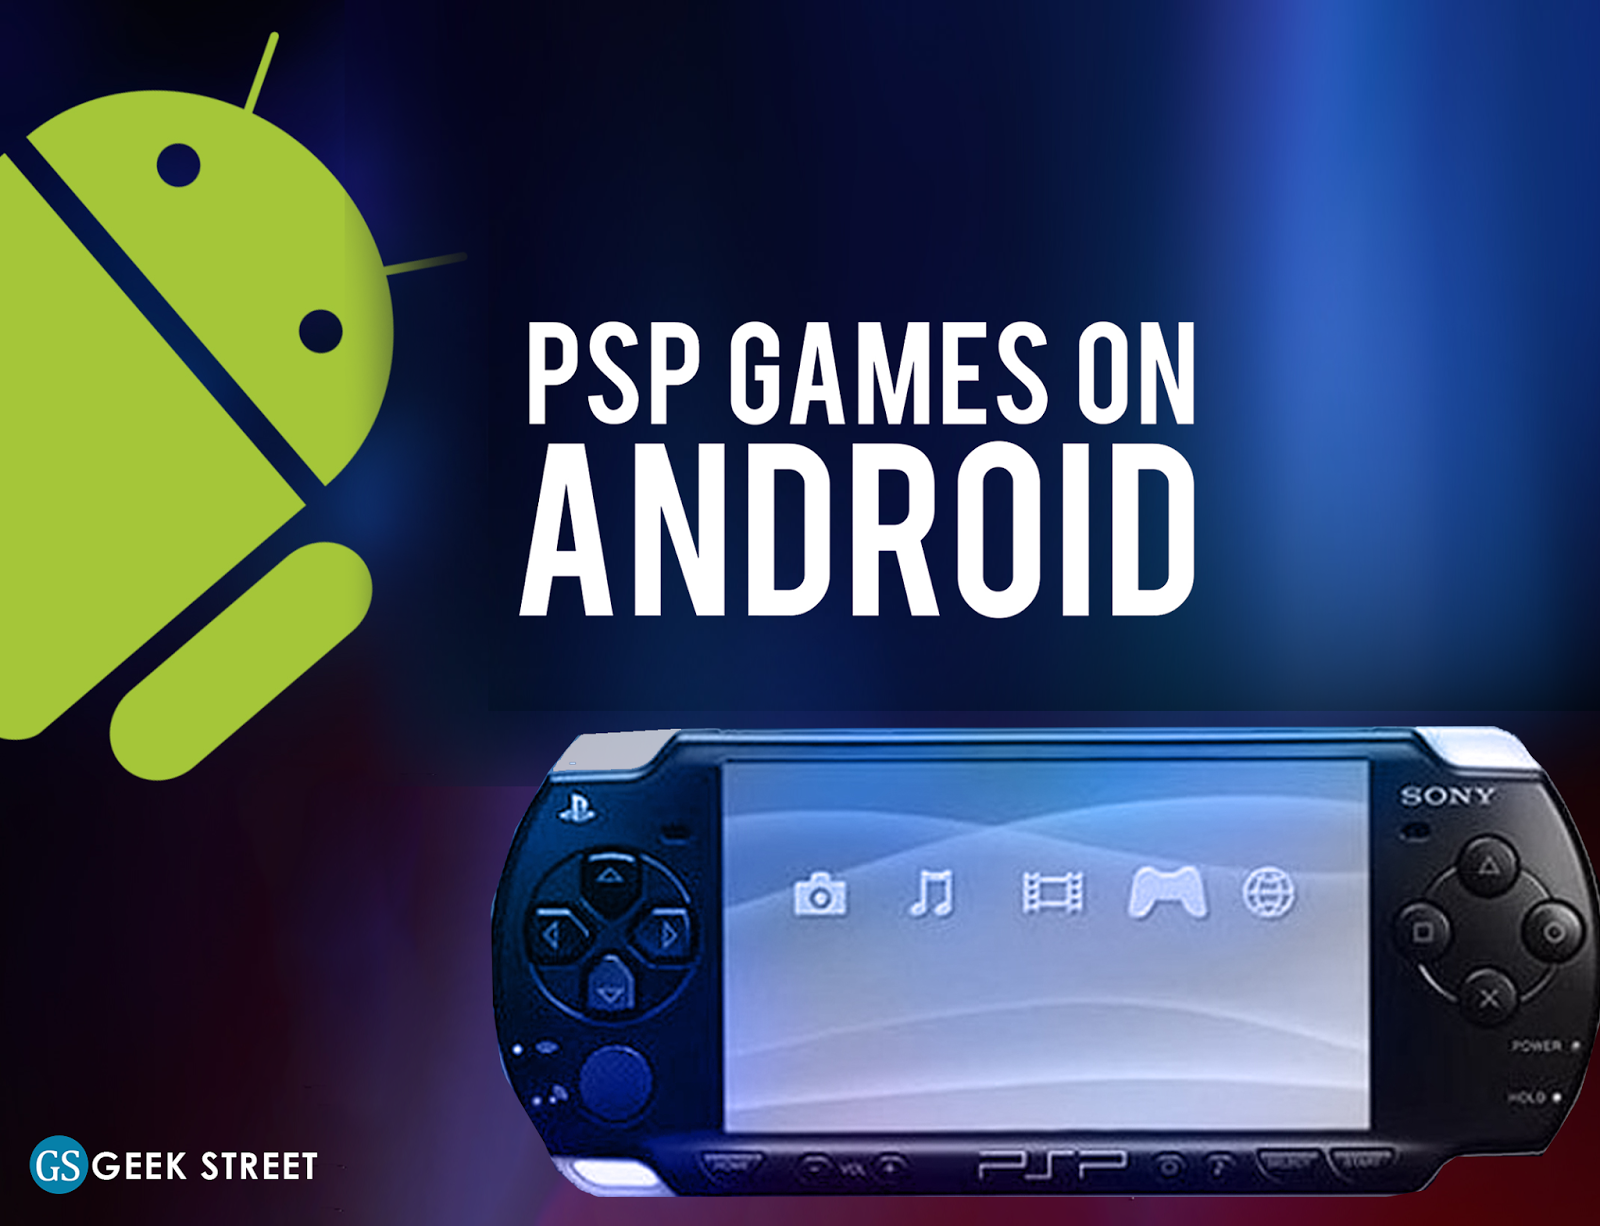 Play PSP Games on Android - APK MOD